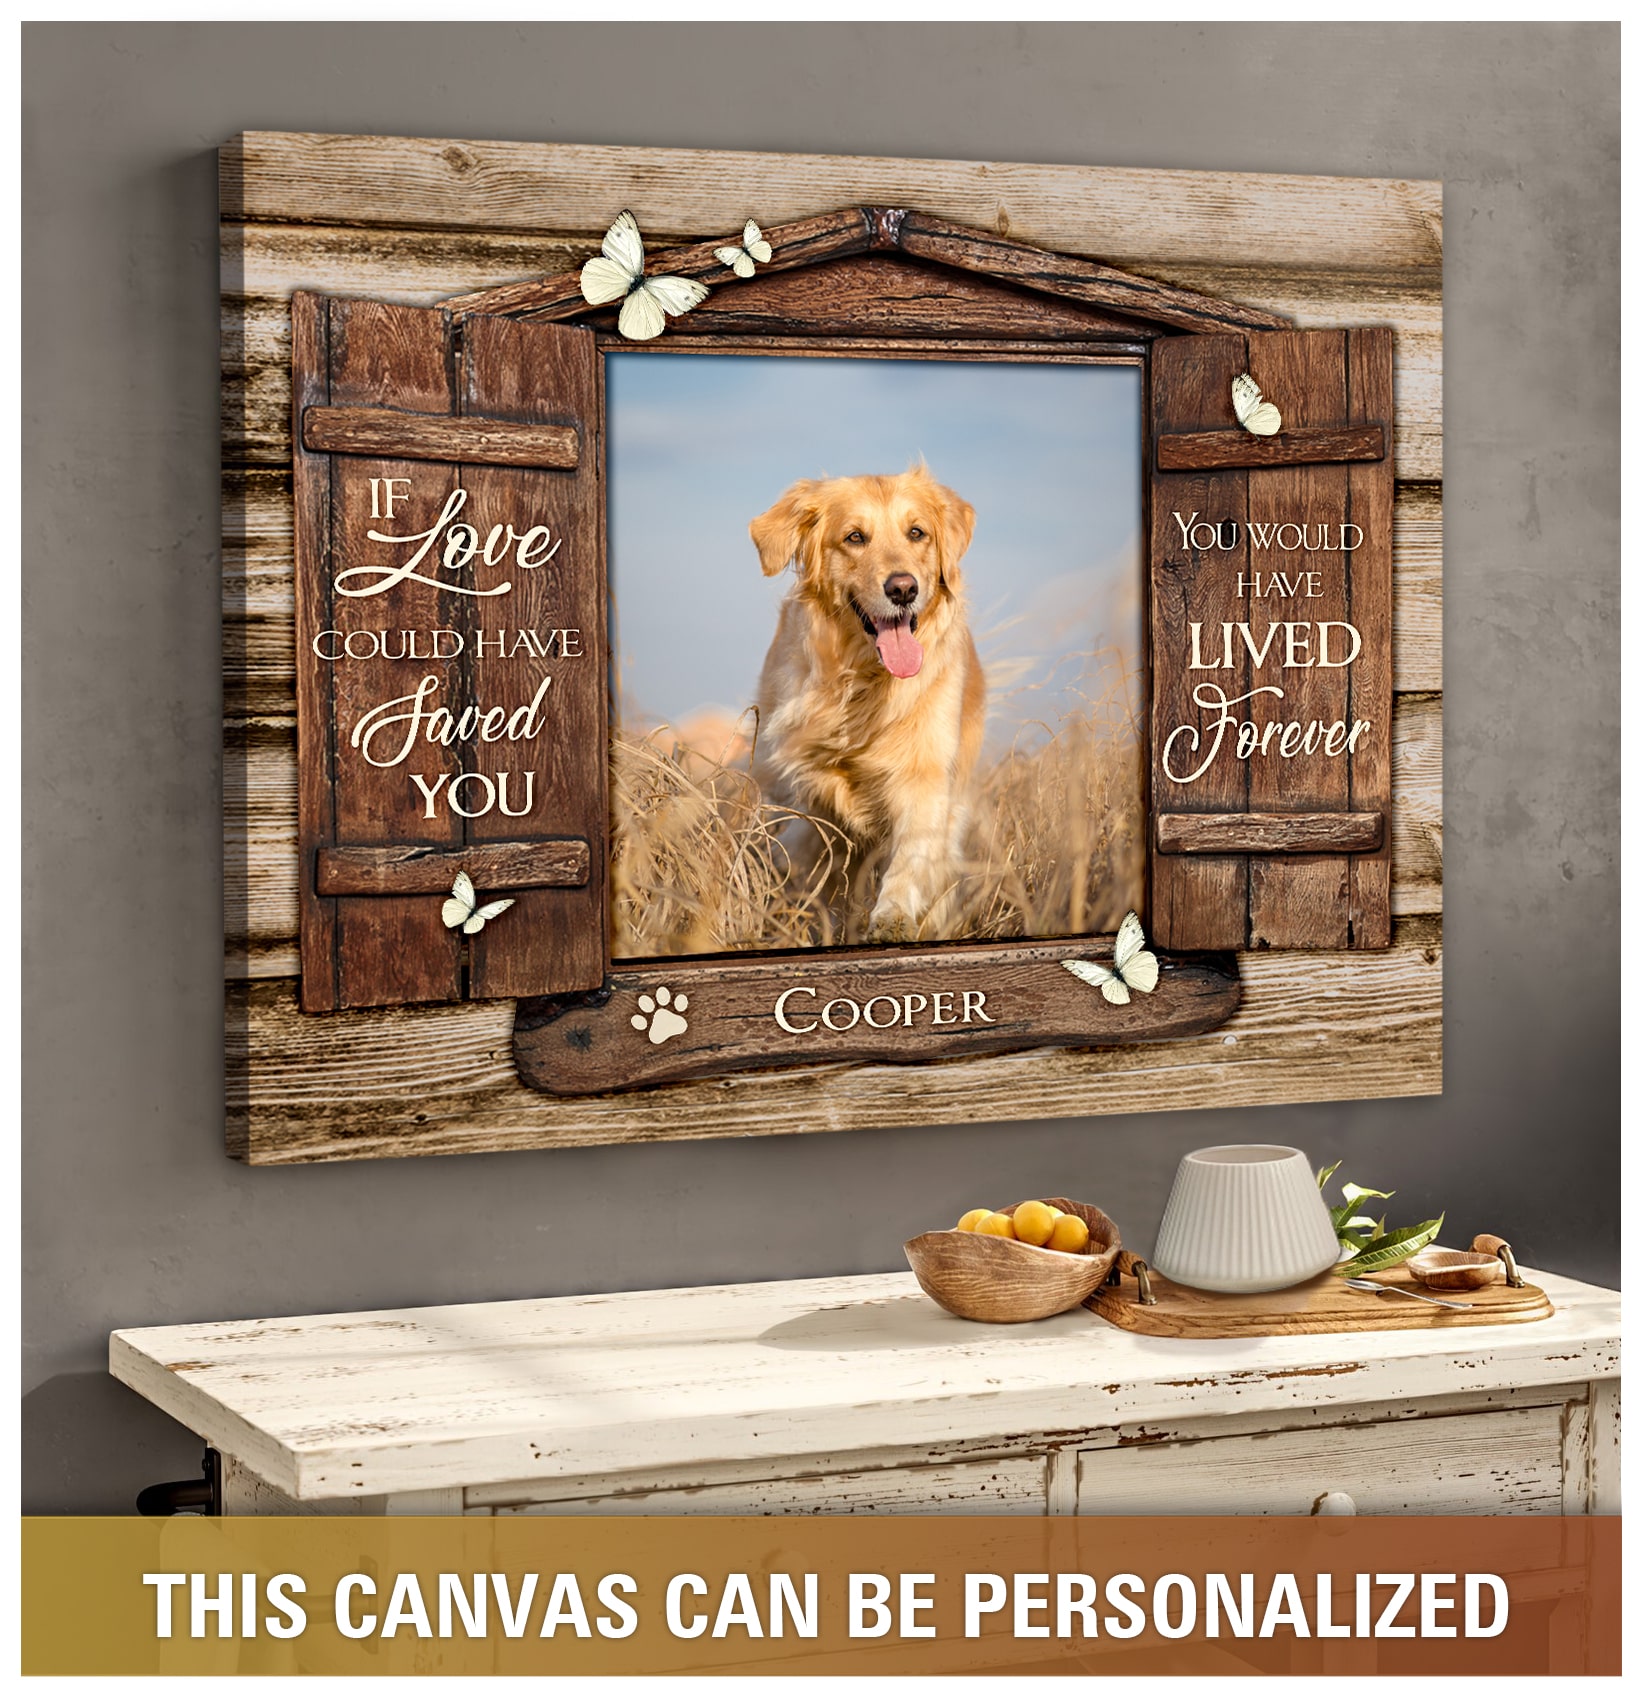 Personalized Pet If love could have faved you you would have lived forever canvas1